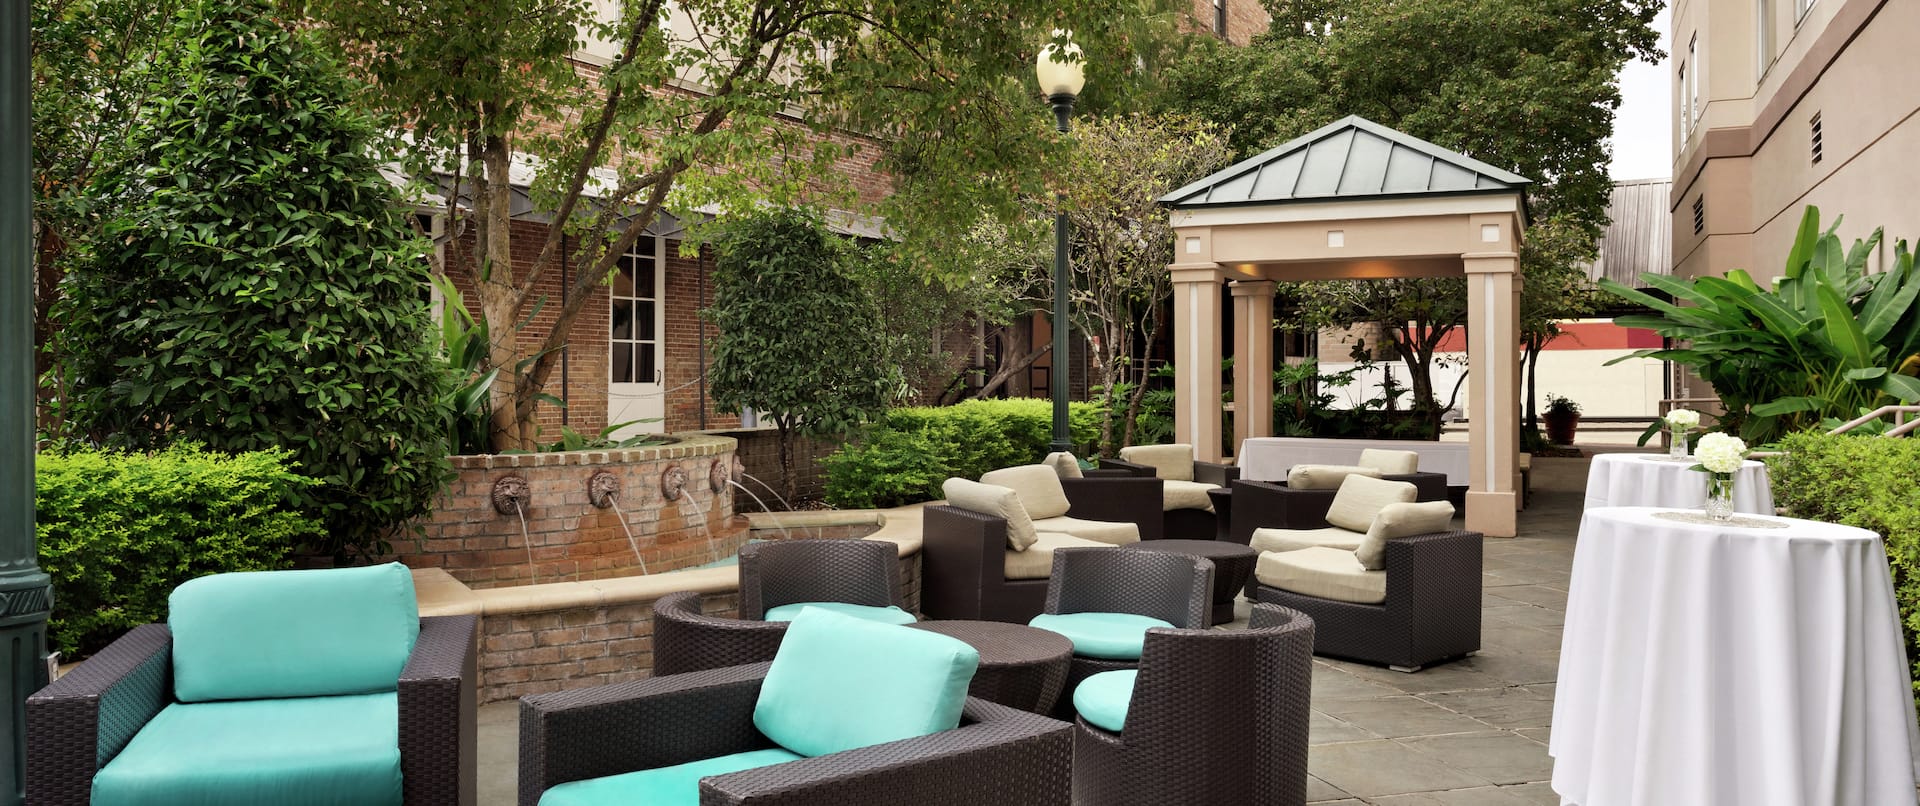 Outdoor Courtyard Seating Area